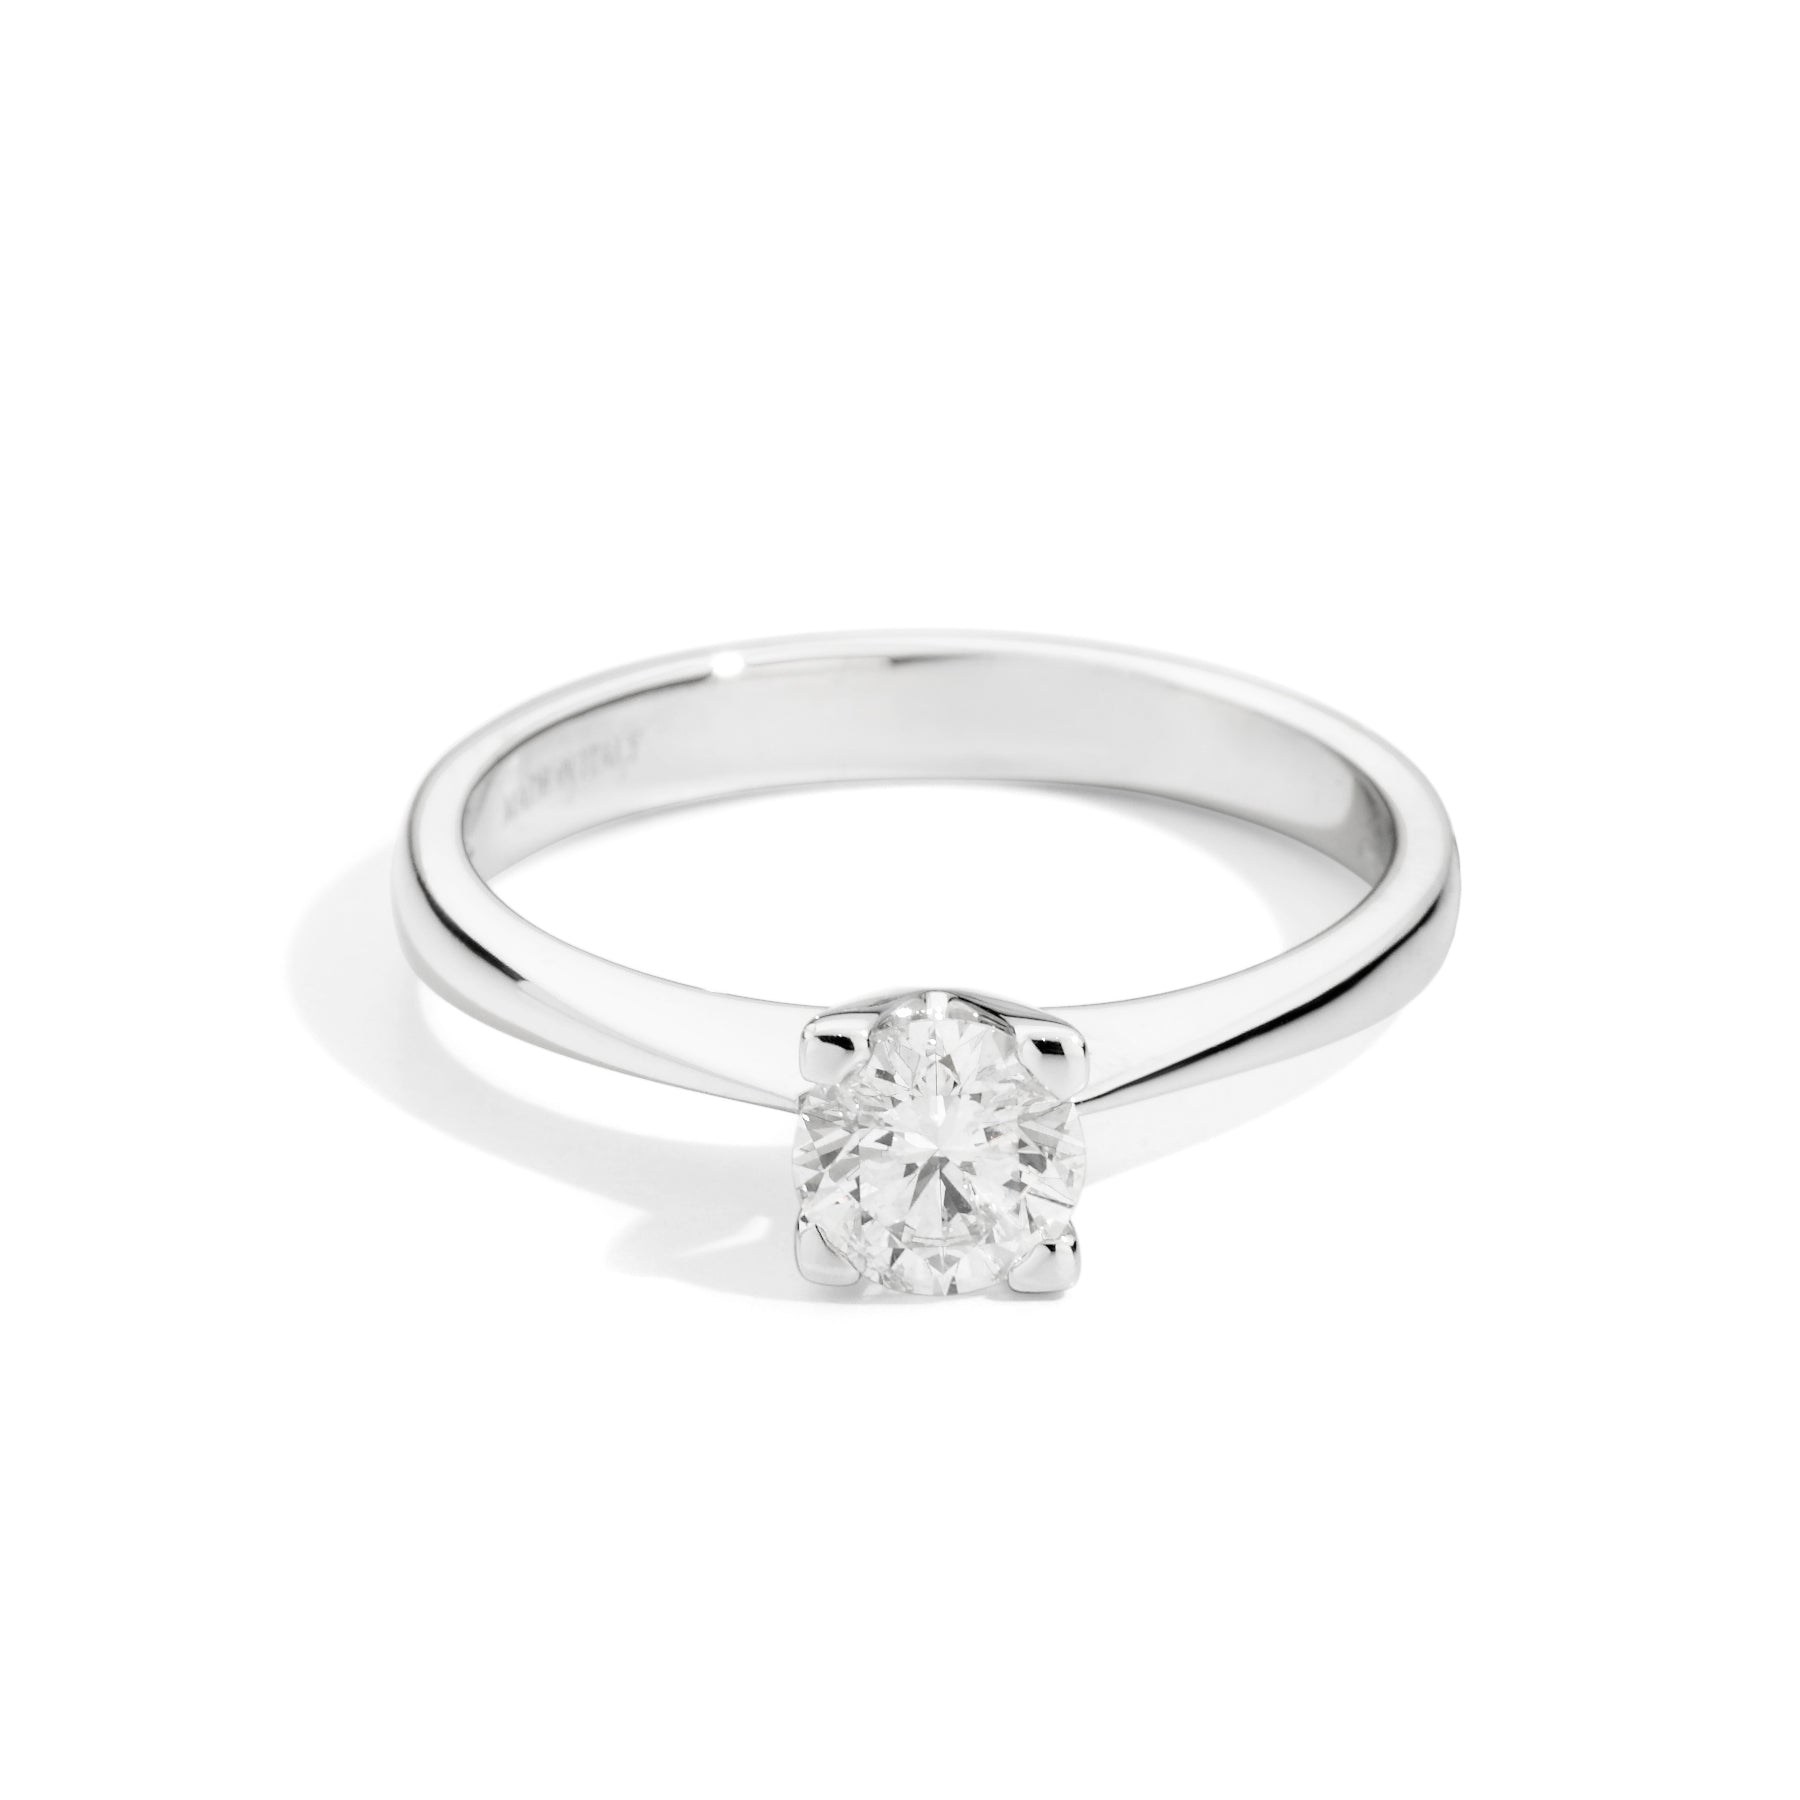 Bague solitaire collection Mariateresa, 0,31ct - R30SO100/031